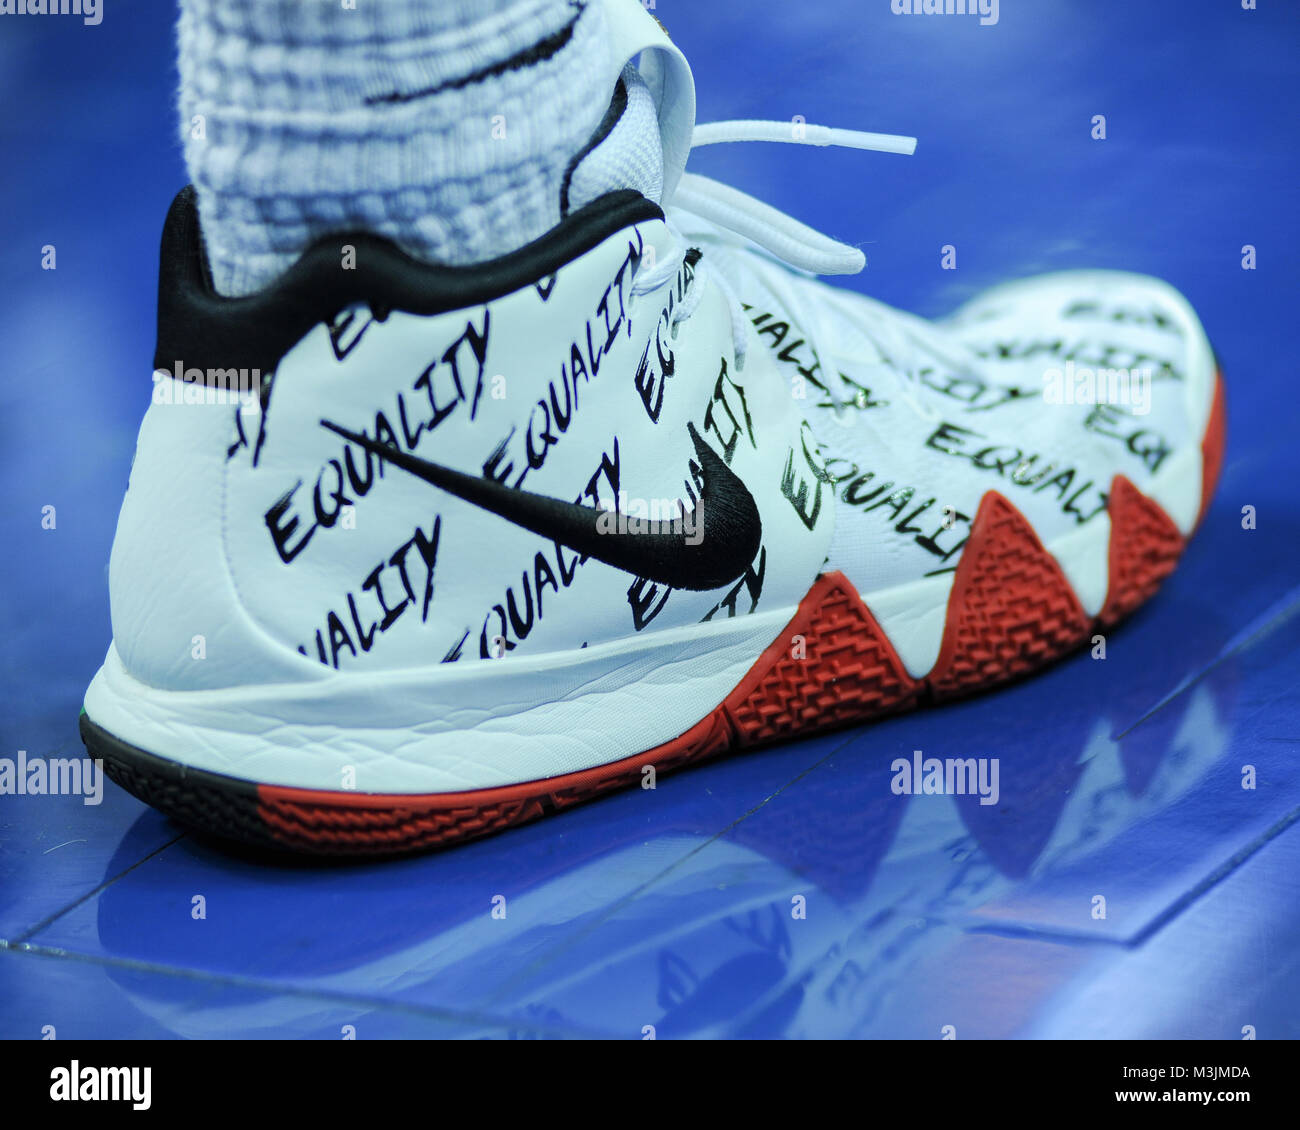 Memphis, USA. 11th Feb, 2018. The Nike basketball shoe of UCF Knights  guard, Ceasar DeJesus (4). UCF defeated Memphis, 68-64, at the FedEx Forum.  Credit: Cal Sport Media/Alamy Live News Stock Photo - Alamy